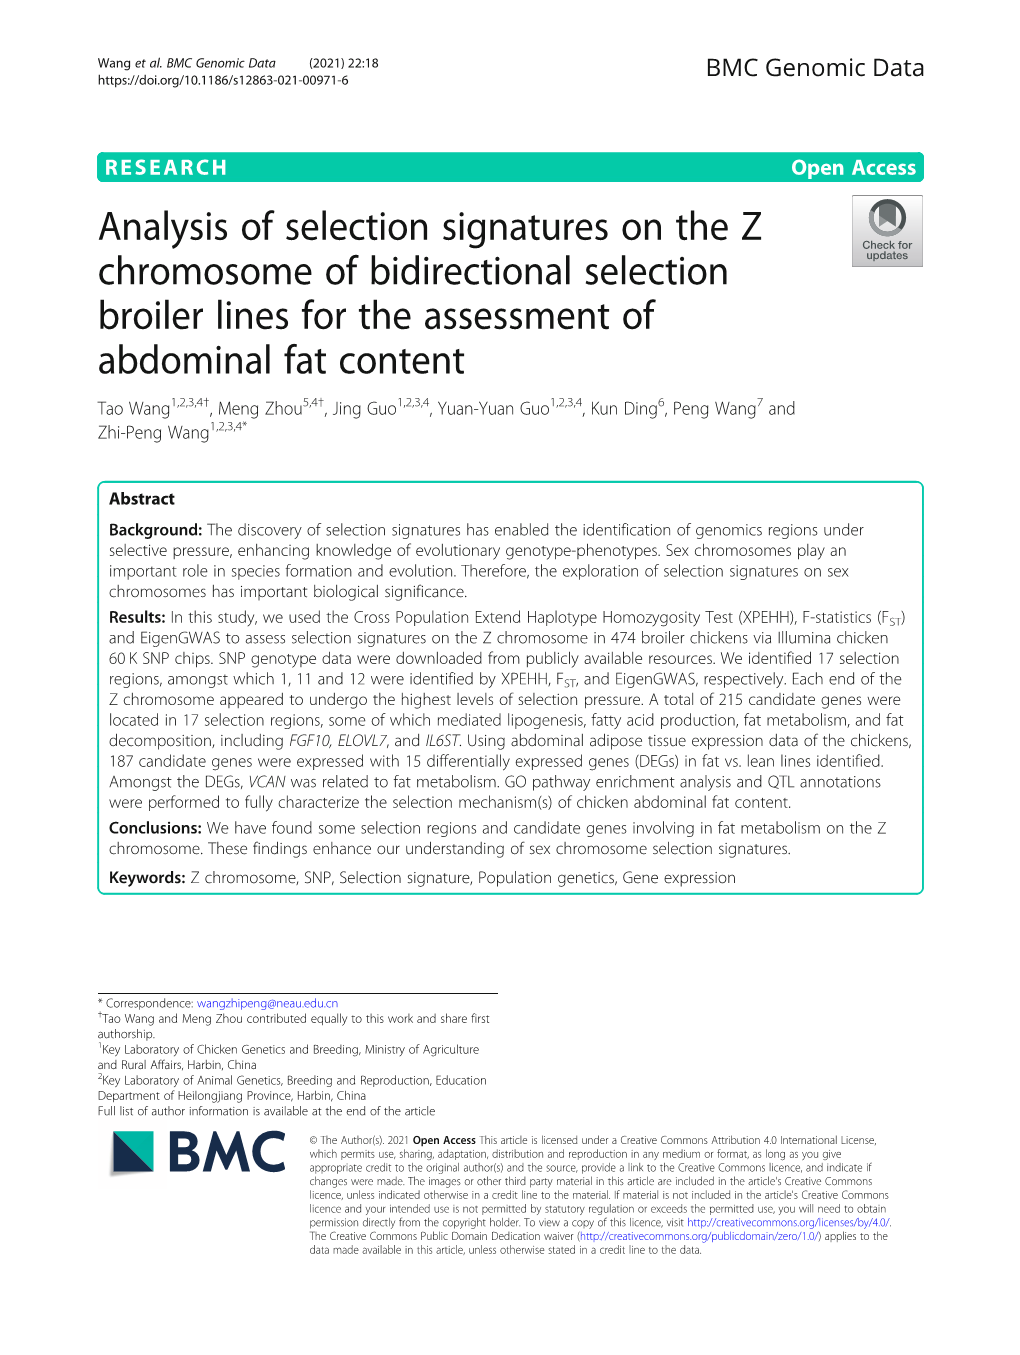 Analysis of Selection Signatures on the Z Chromosome of Bidirectional